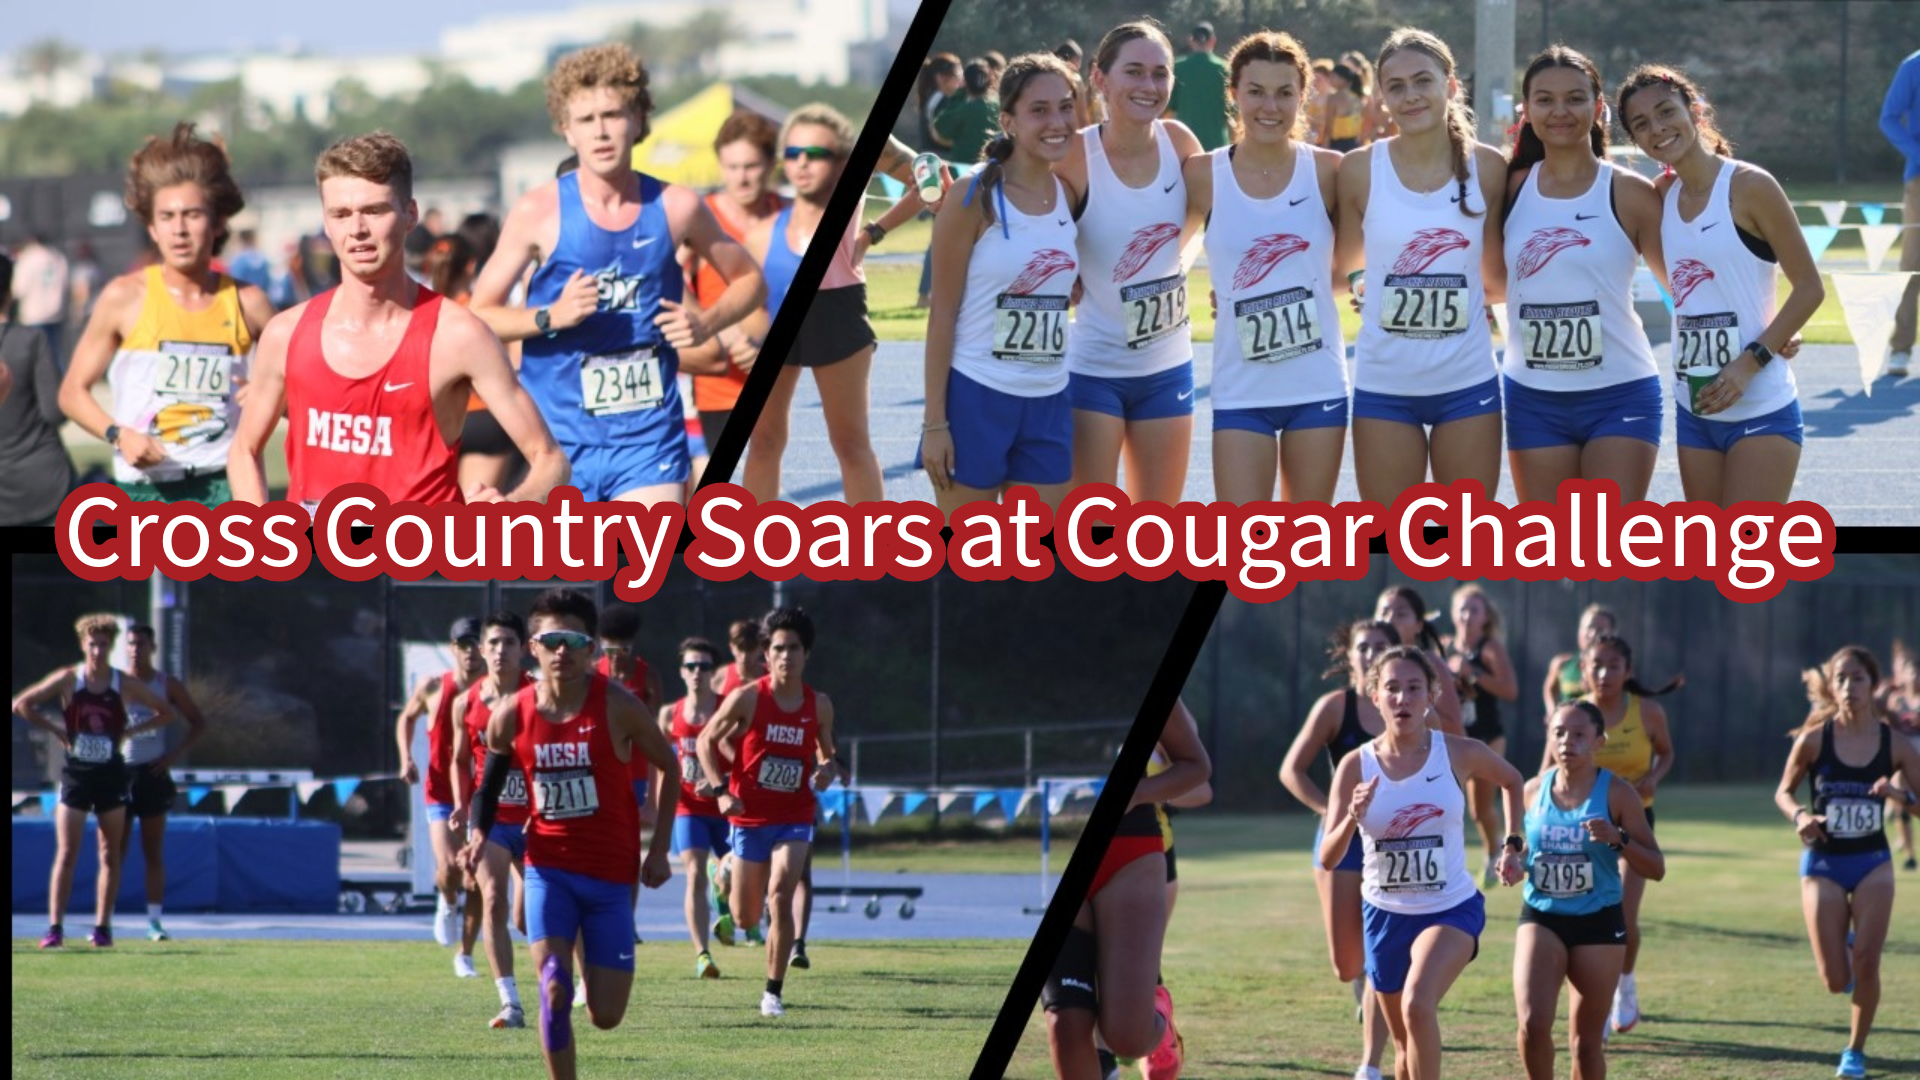 MCC Cross Country competed at Cougar Challenge on Saturday